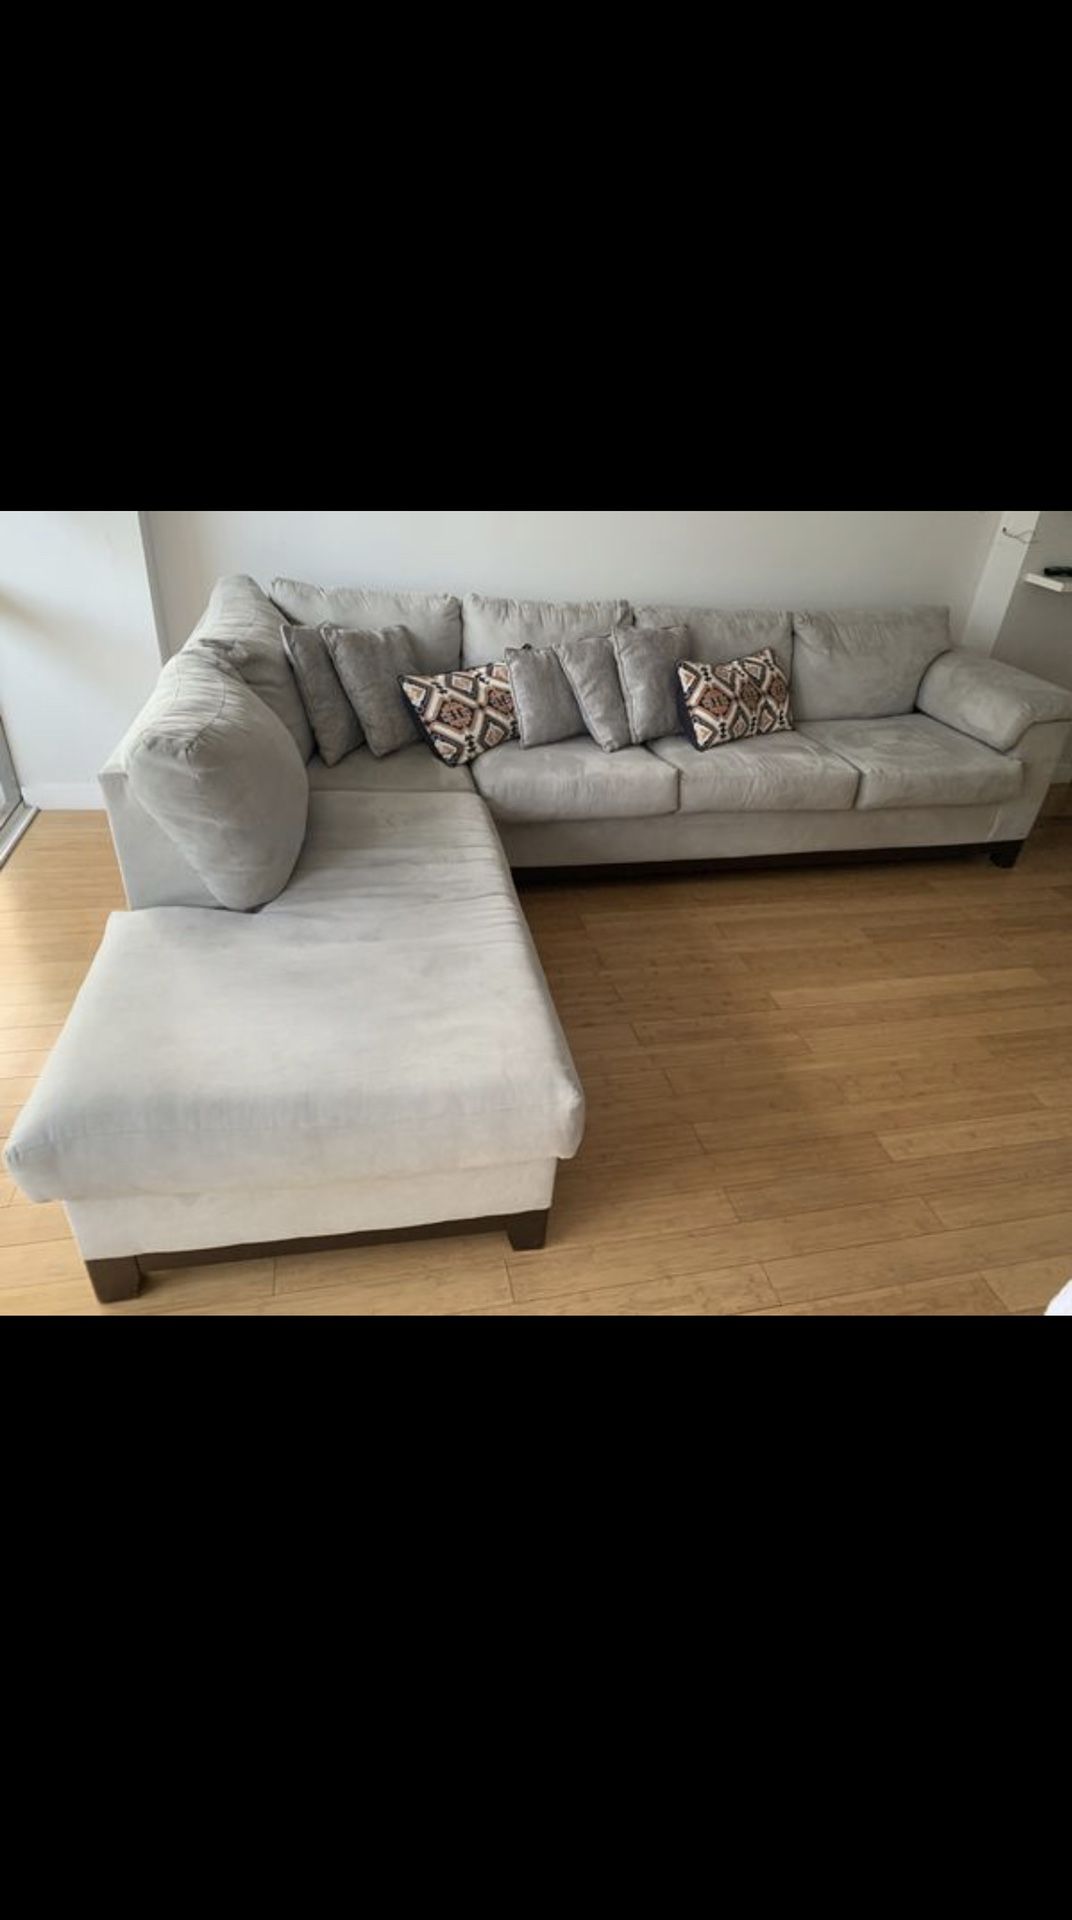 Sectional Sofa bed